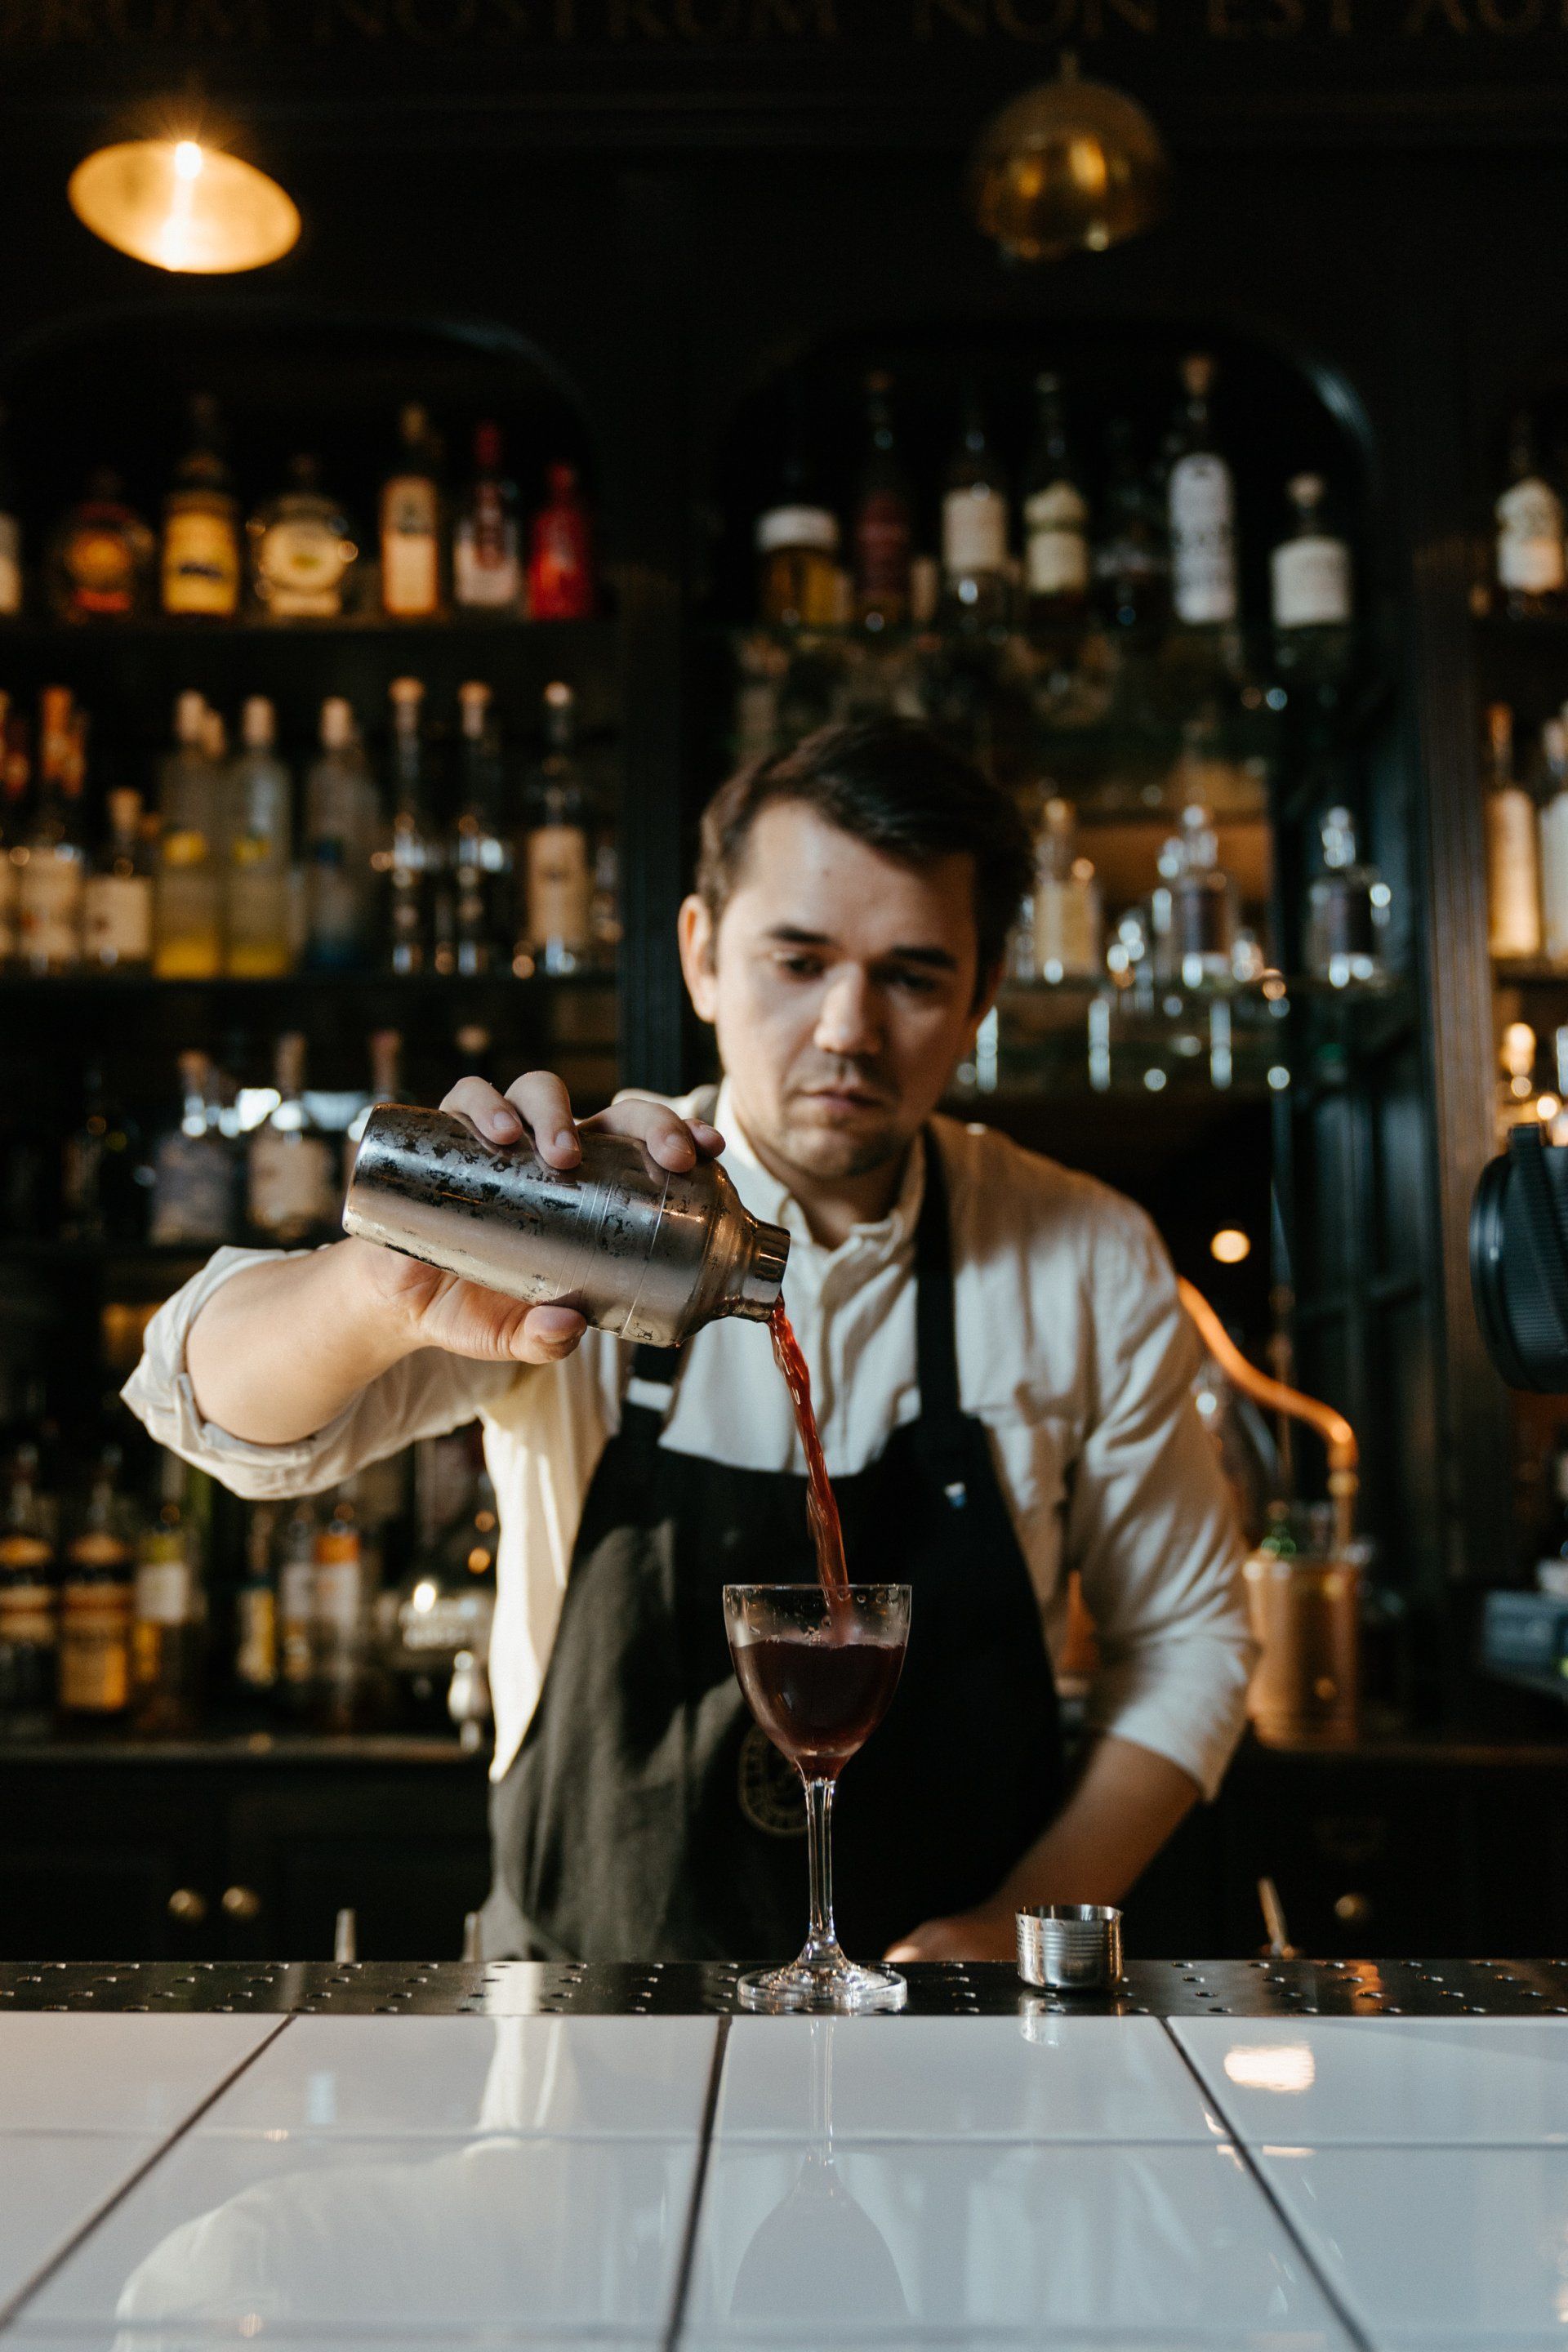 A bartender is pouring a drink into a glass at a bar.